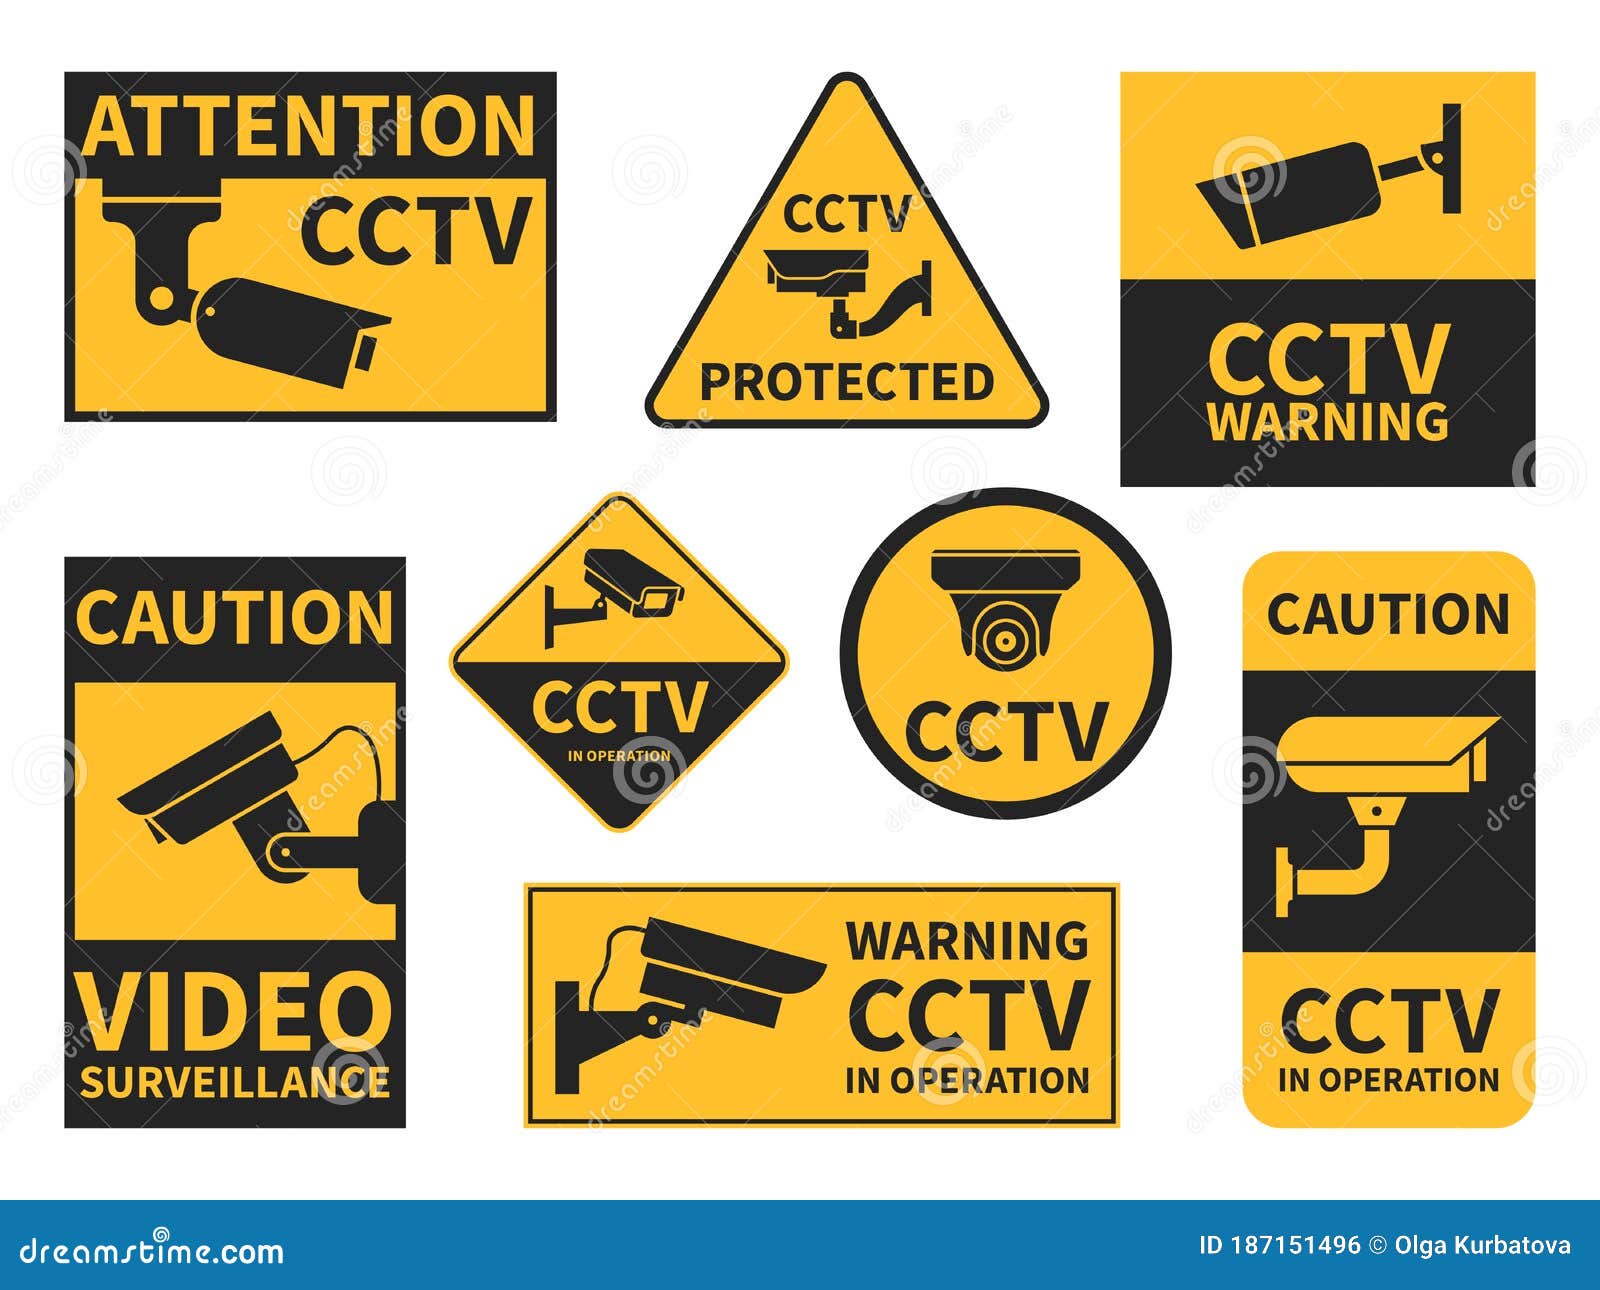 CCTV SECURITY CAMERA PACK OF 4 SIGNS SECURITY CAMERA WARNING SIGNS 